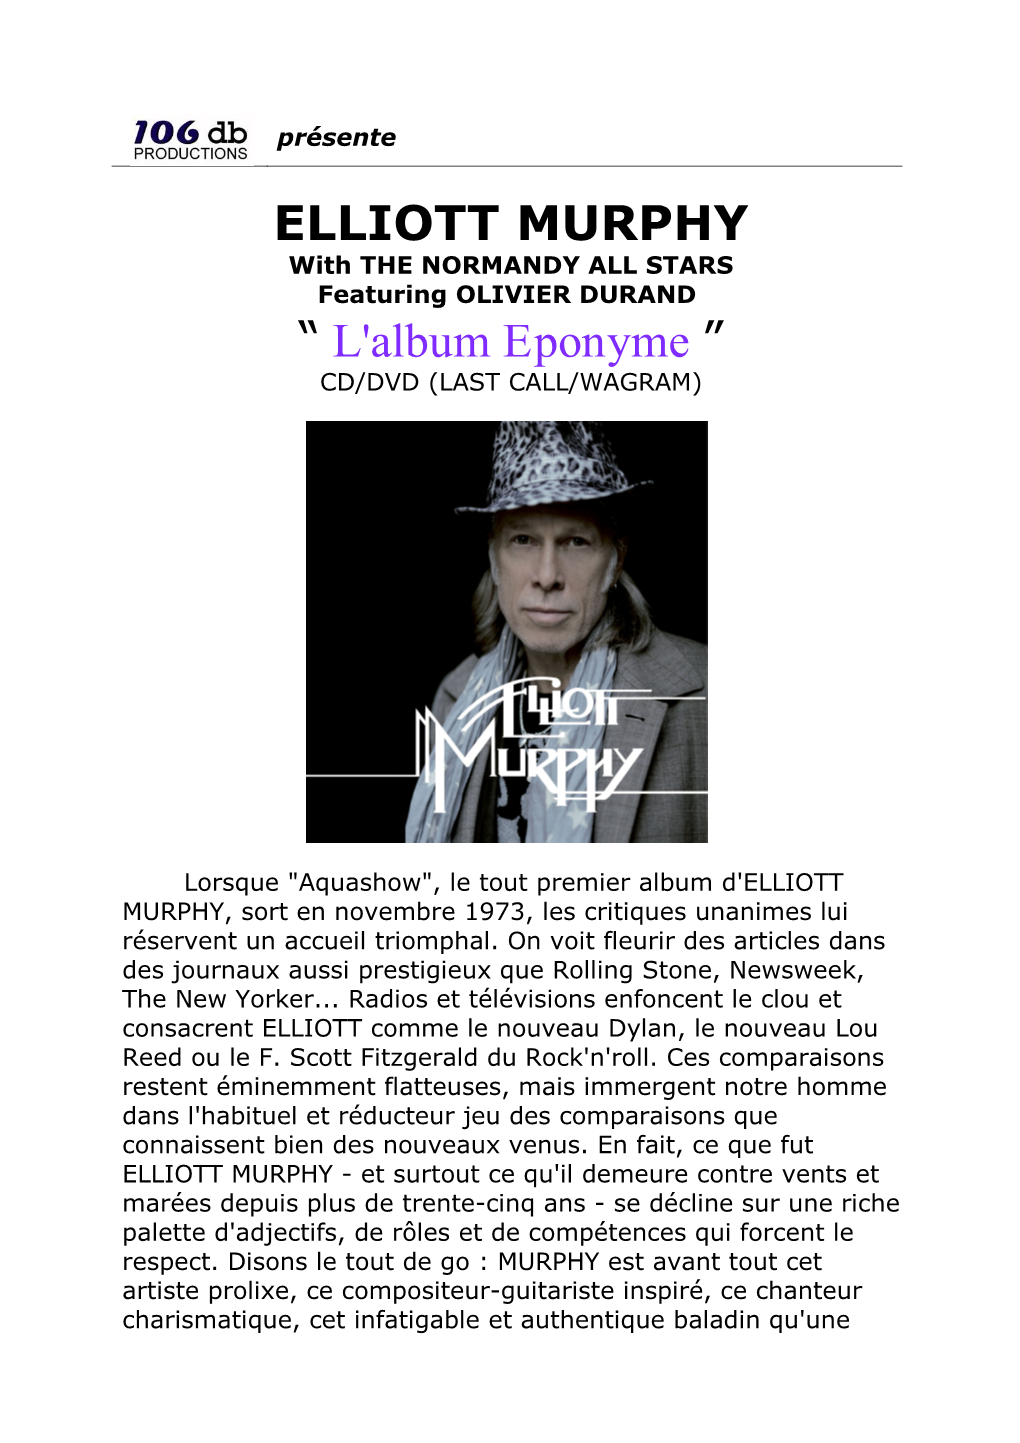 ELLIOTT MURPHY with the NORMANDY ALL STARS Featuring OLIVIER DURAND “ L'album Eponyme ” CD/DVD (LAST CALL/WAGRAM)